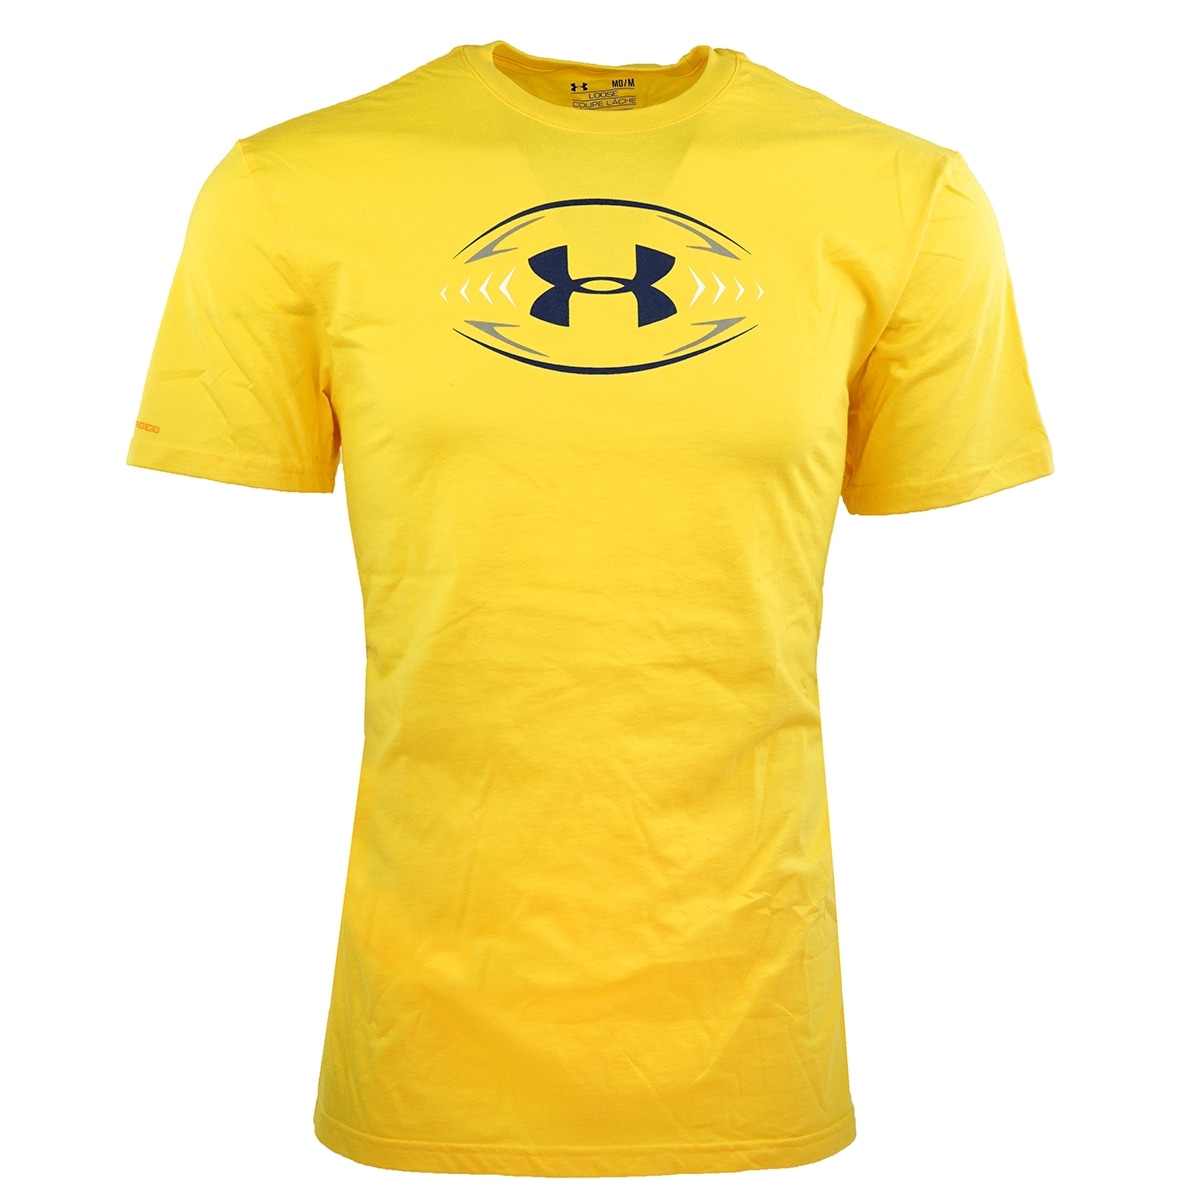 black and yellow under armour shirt